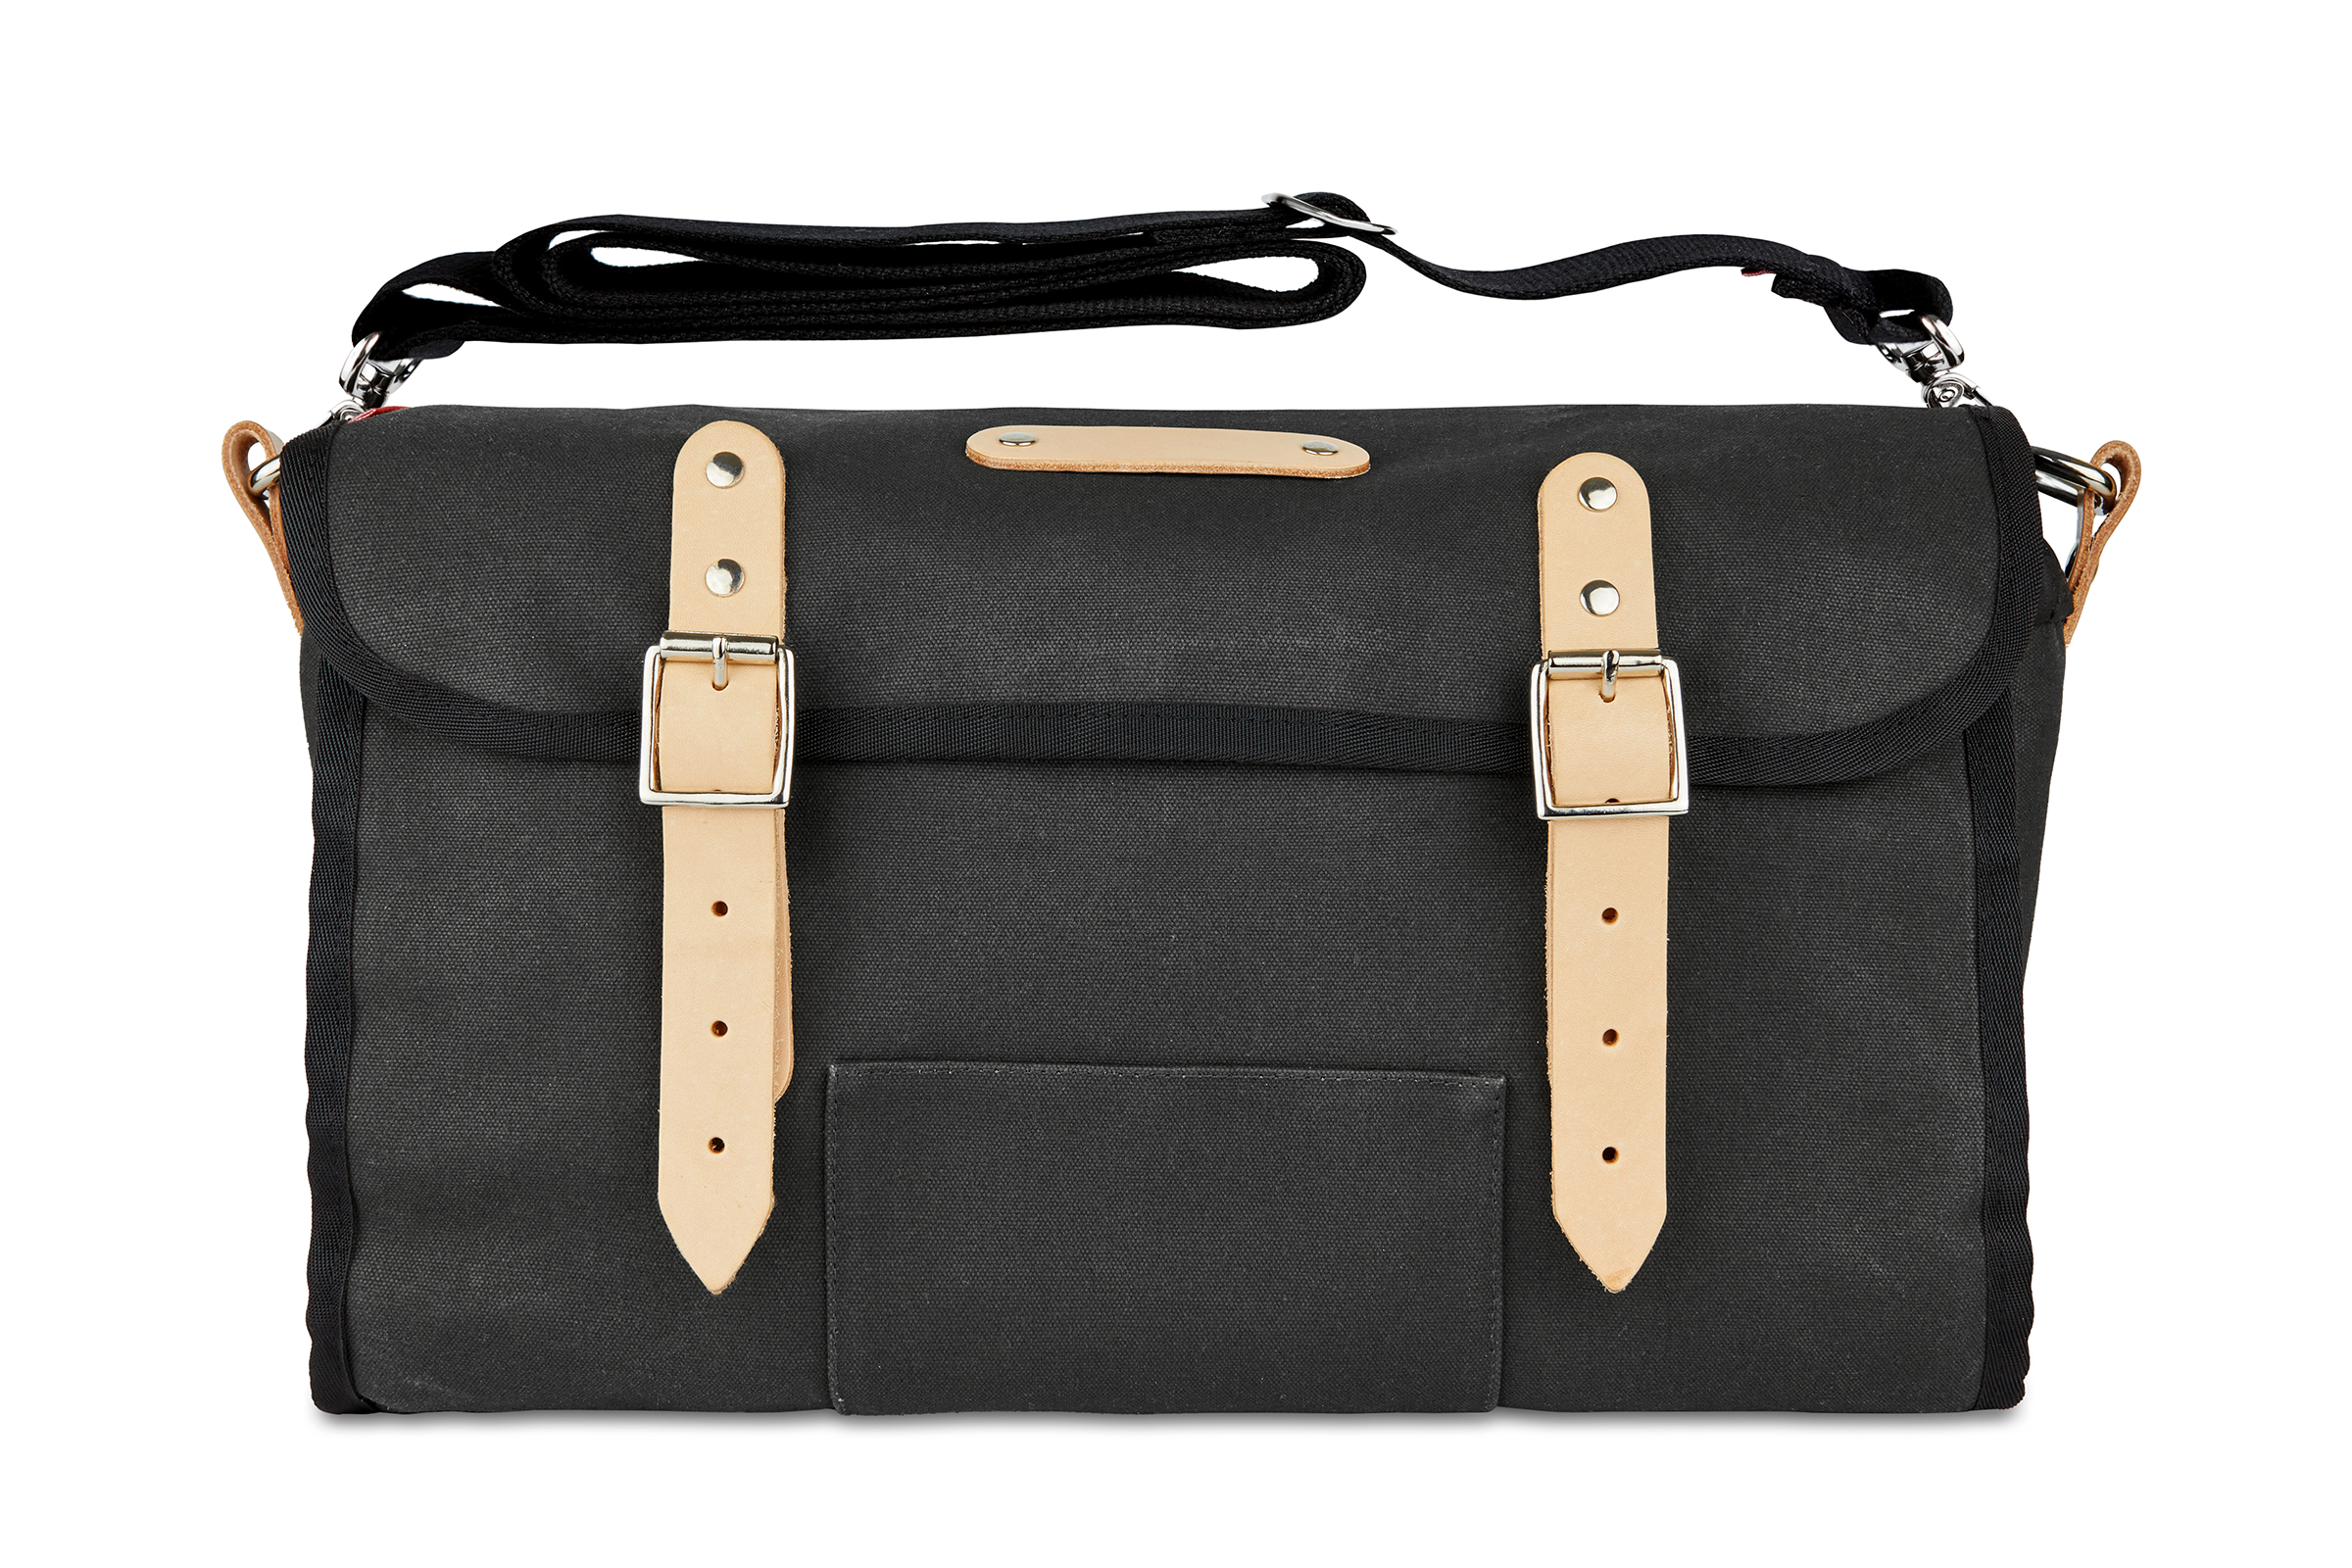 Frost and Sekers Otis saddle bag. Black canvas with tan leather.